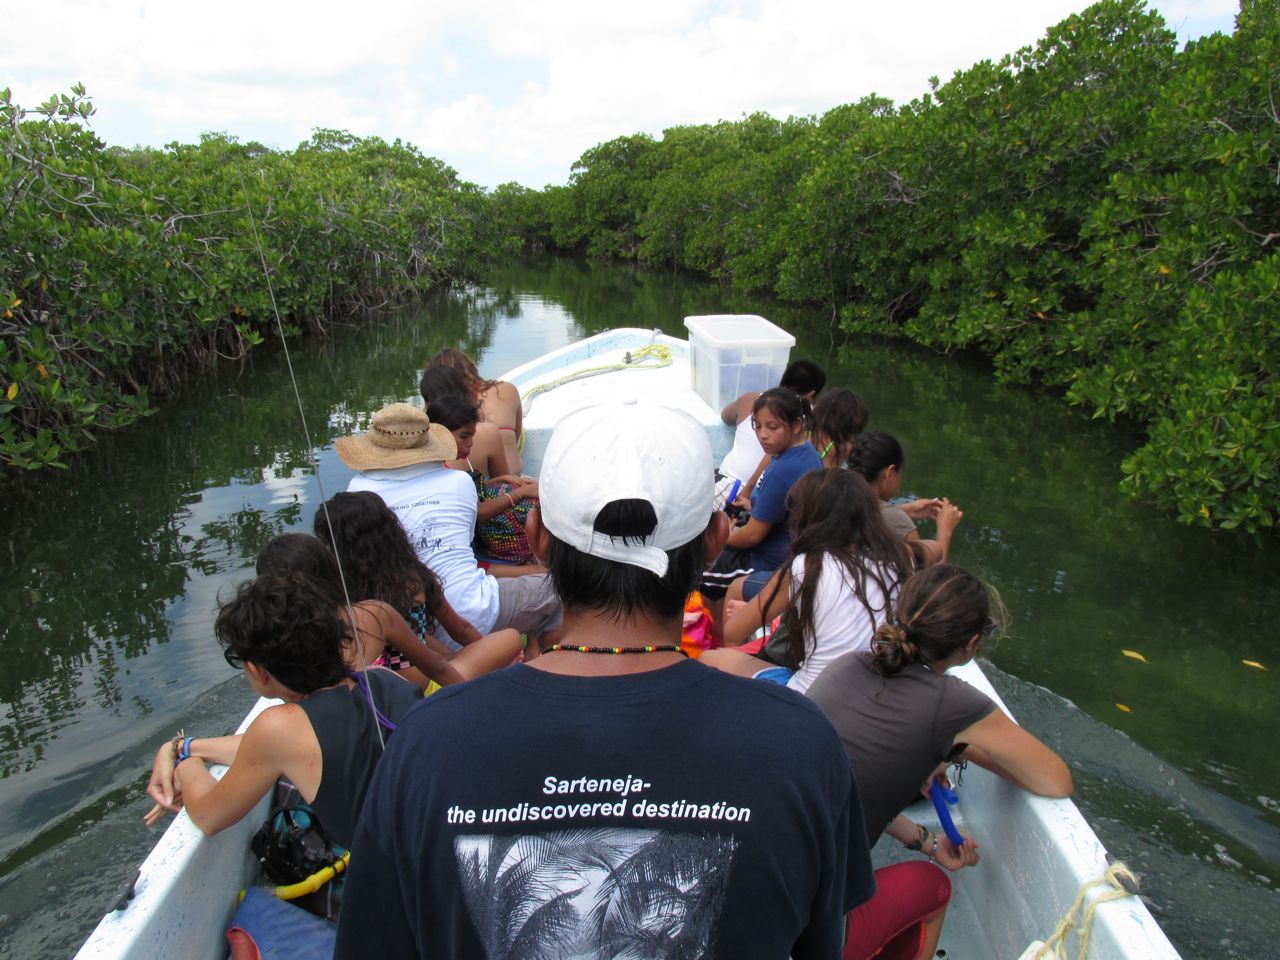 As we slowly motor down the old Mayan channel cut through the mangroves, students spot rays and fish